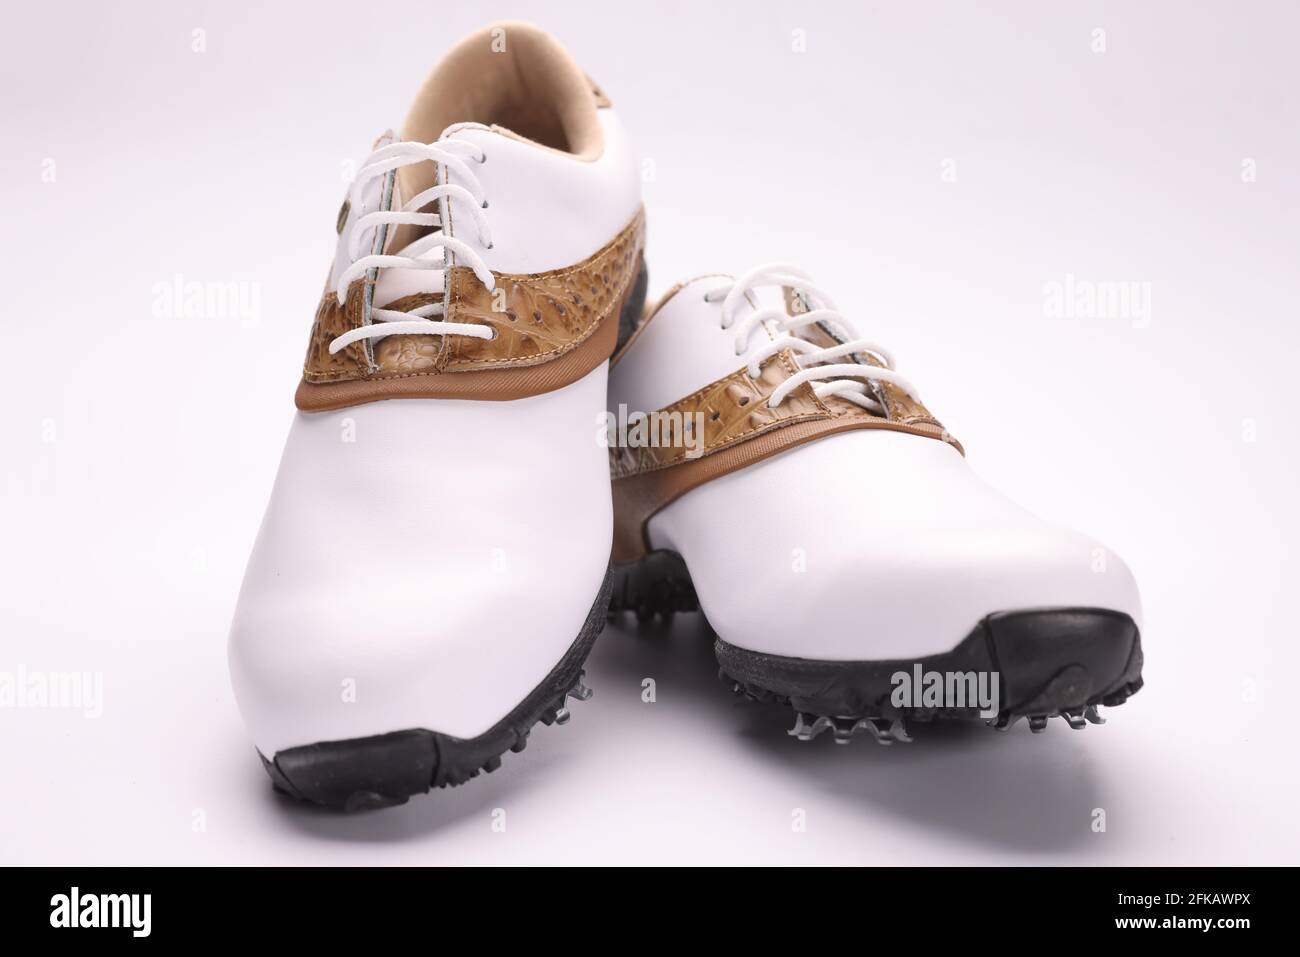 Nuances golf shoes Archives - Page 2 of 3 - Handmade Custom Classic Golf  Shoes